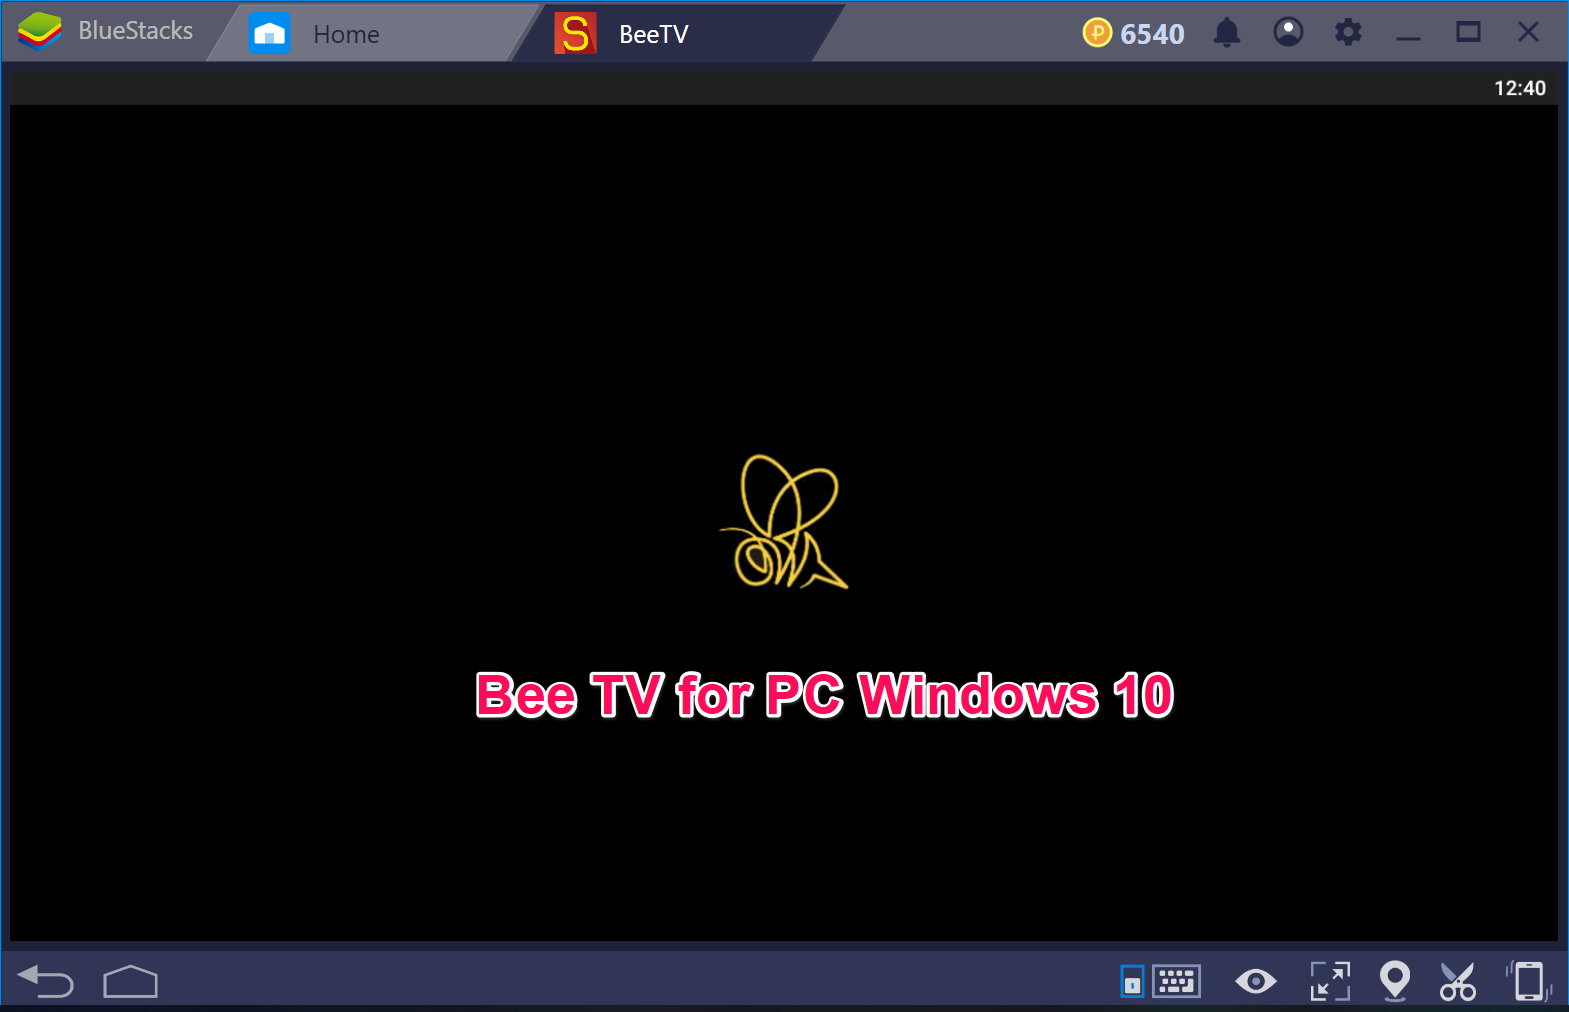 BEE TV for PC Windows 10 